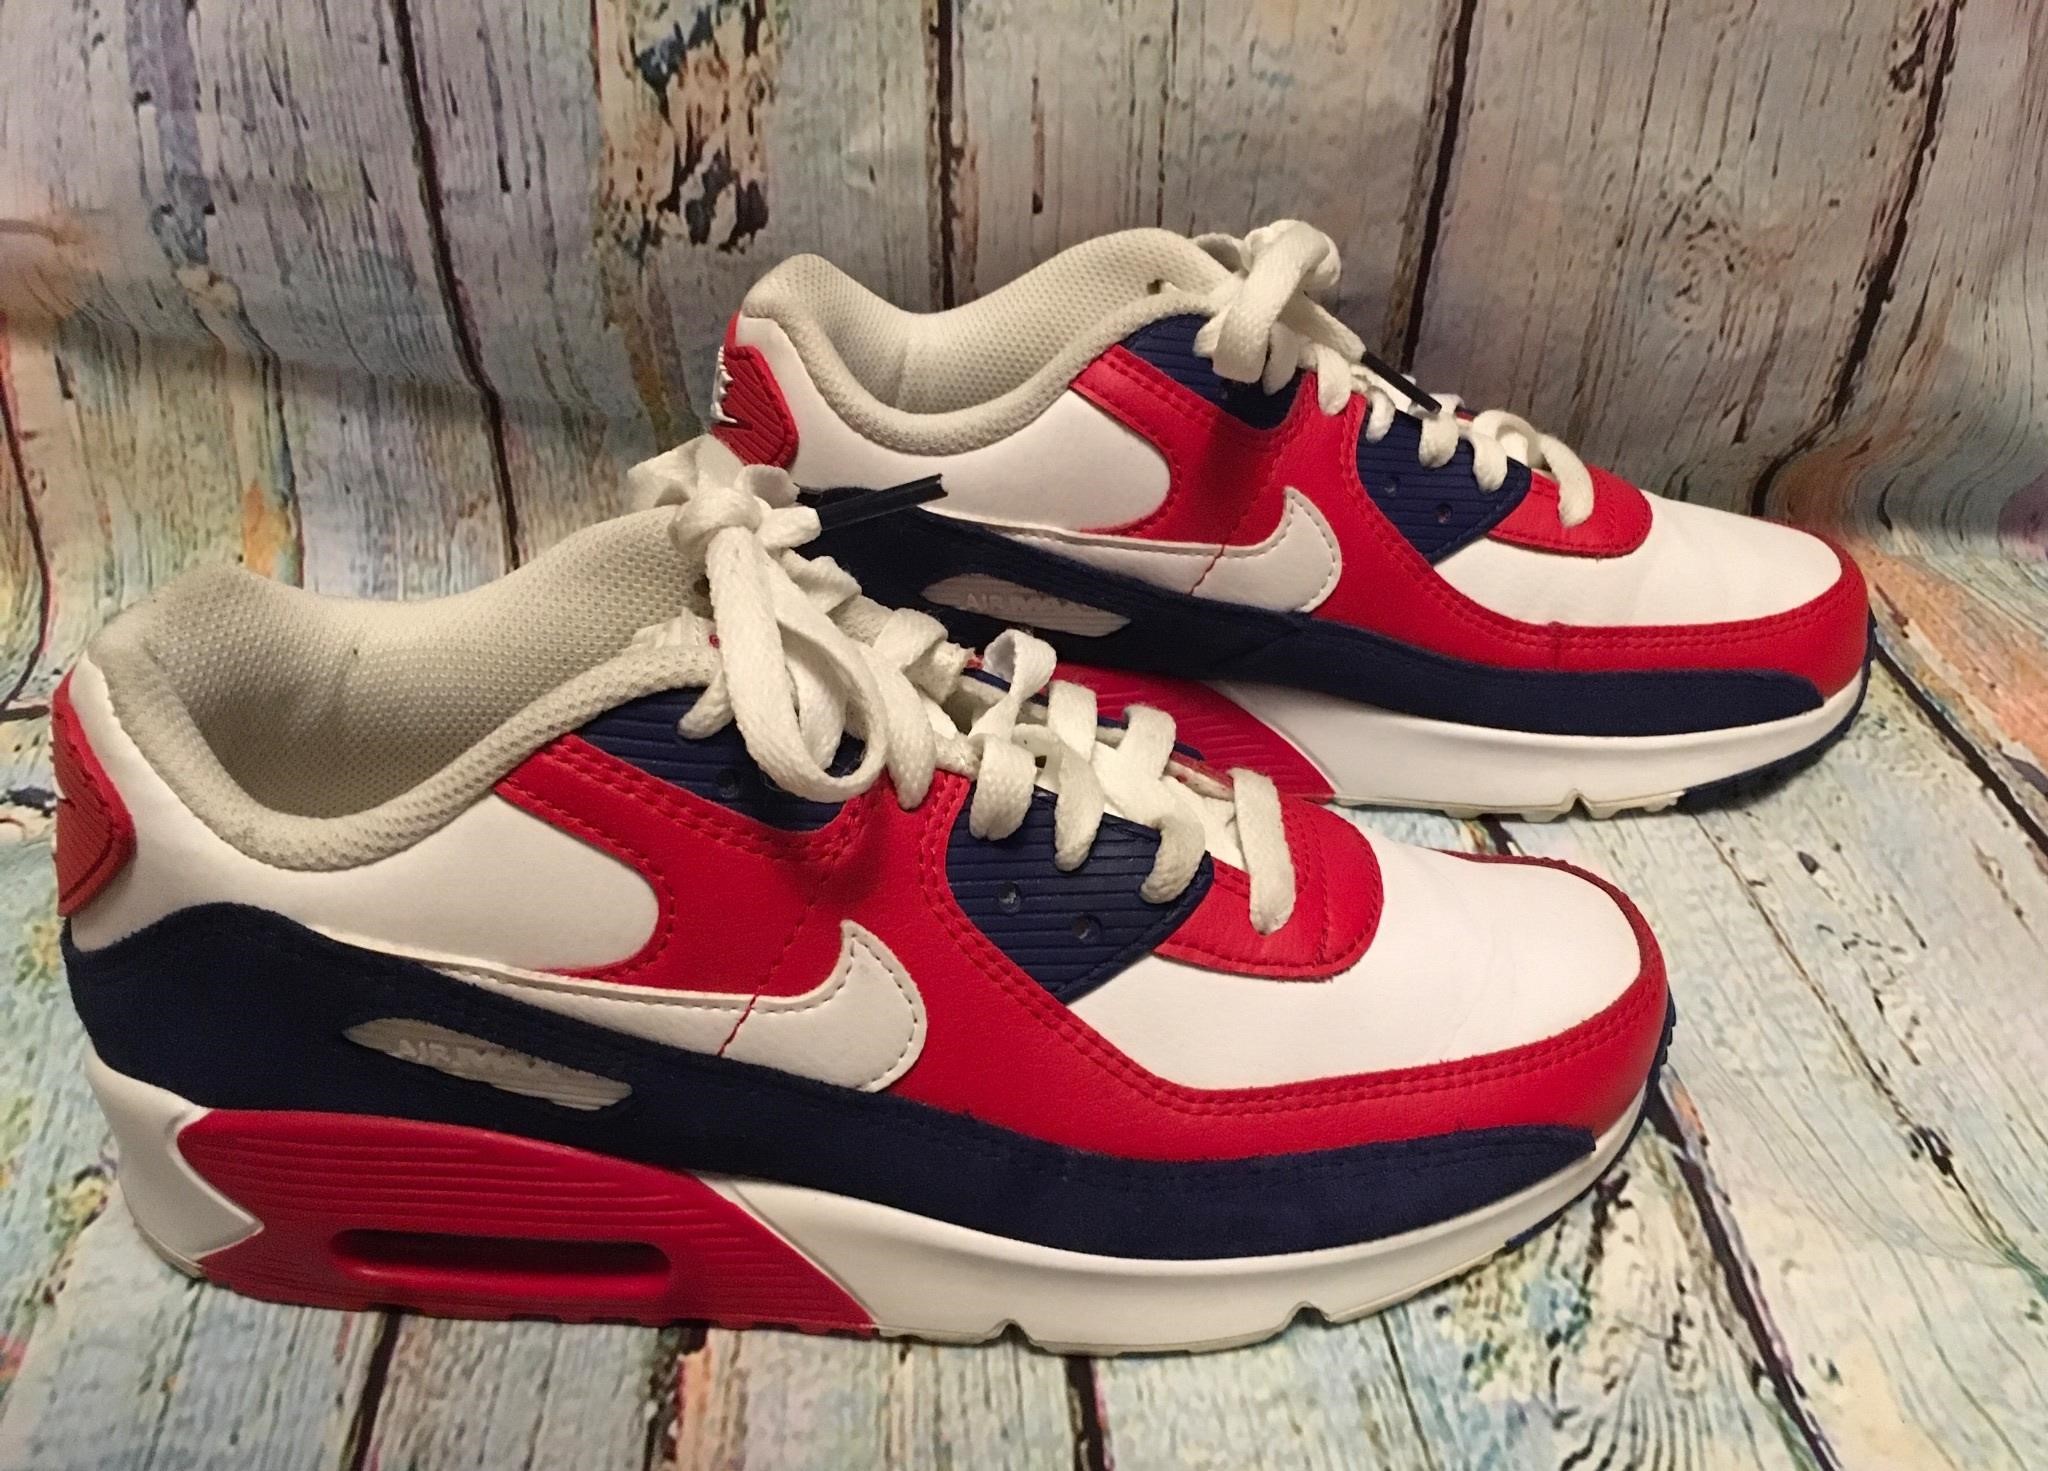 Ladies Nike air max red blue and white